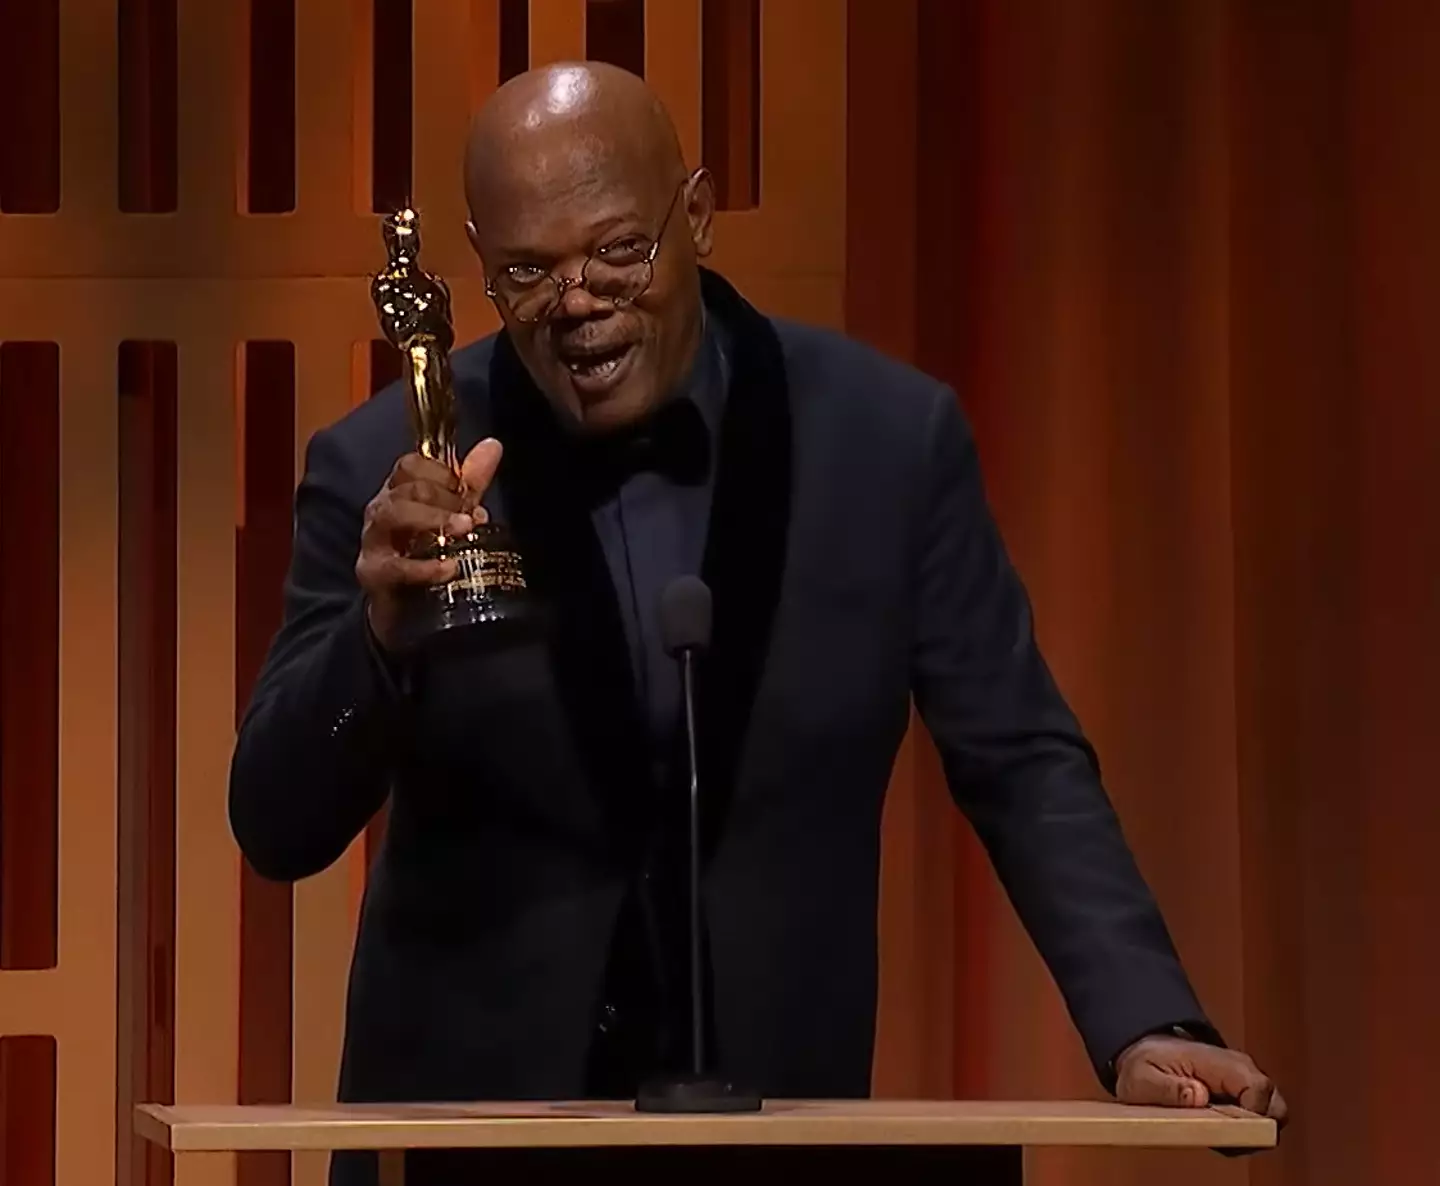 Samuel L. Jackson received an honorary Academy Award, but he believes he could have earned one for A Time To Kill.